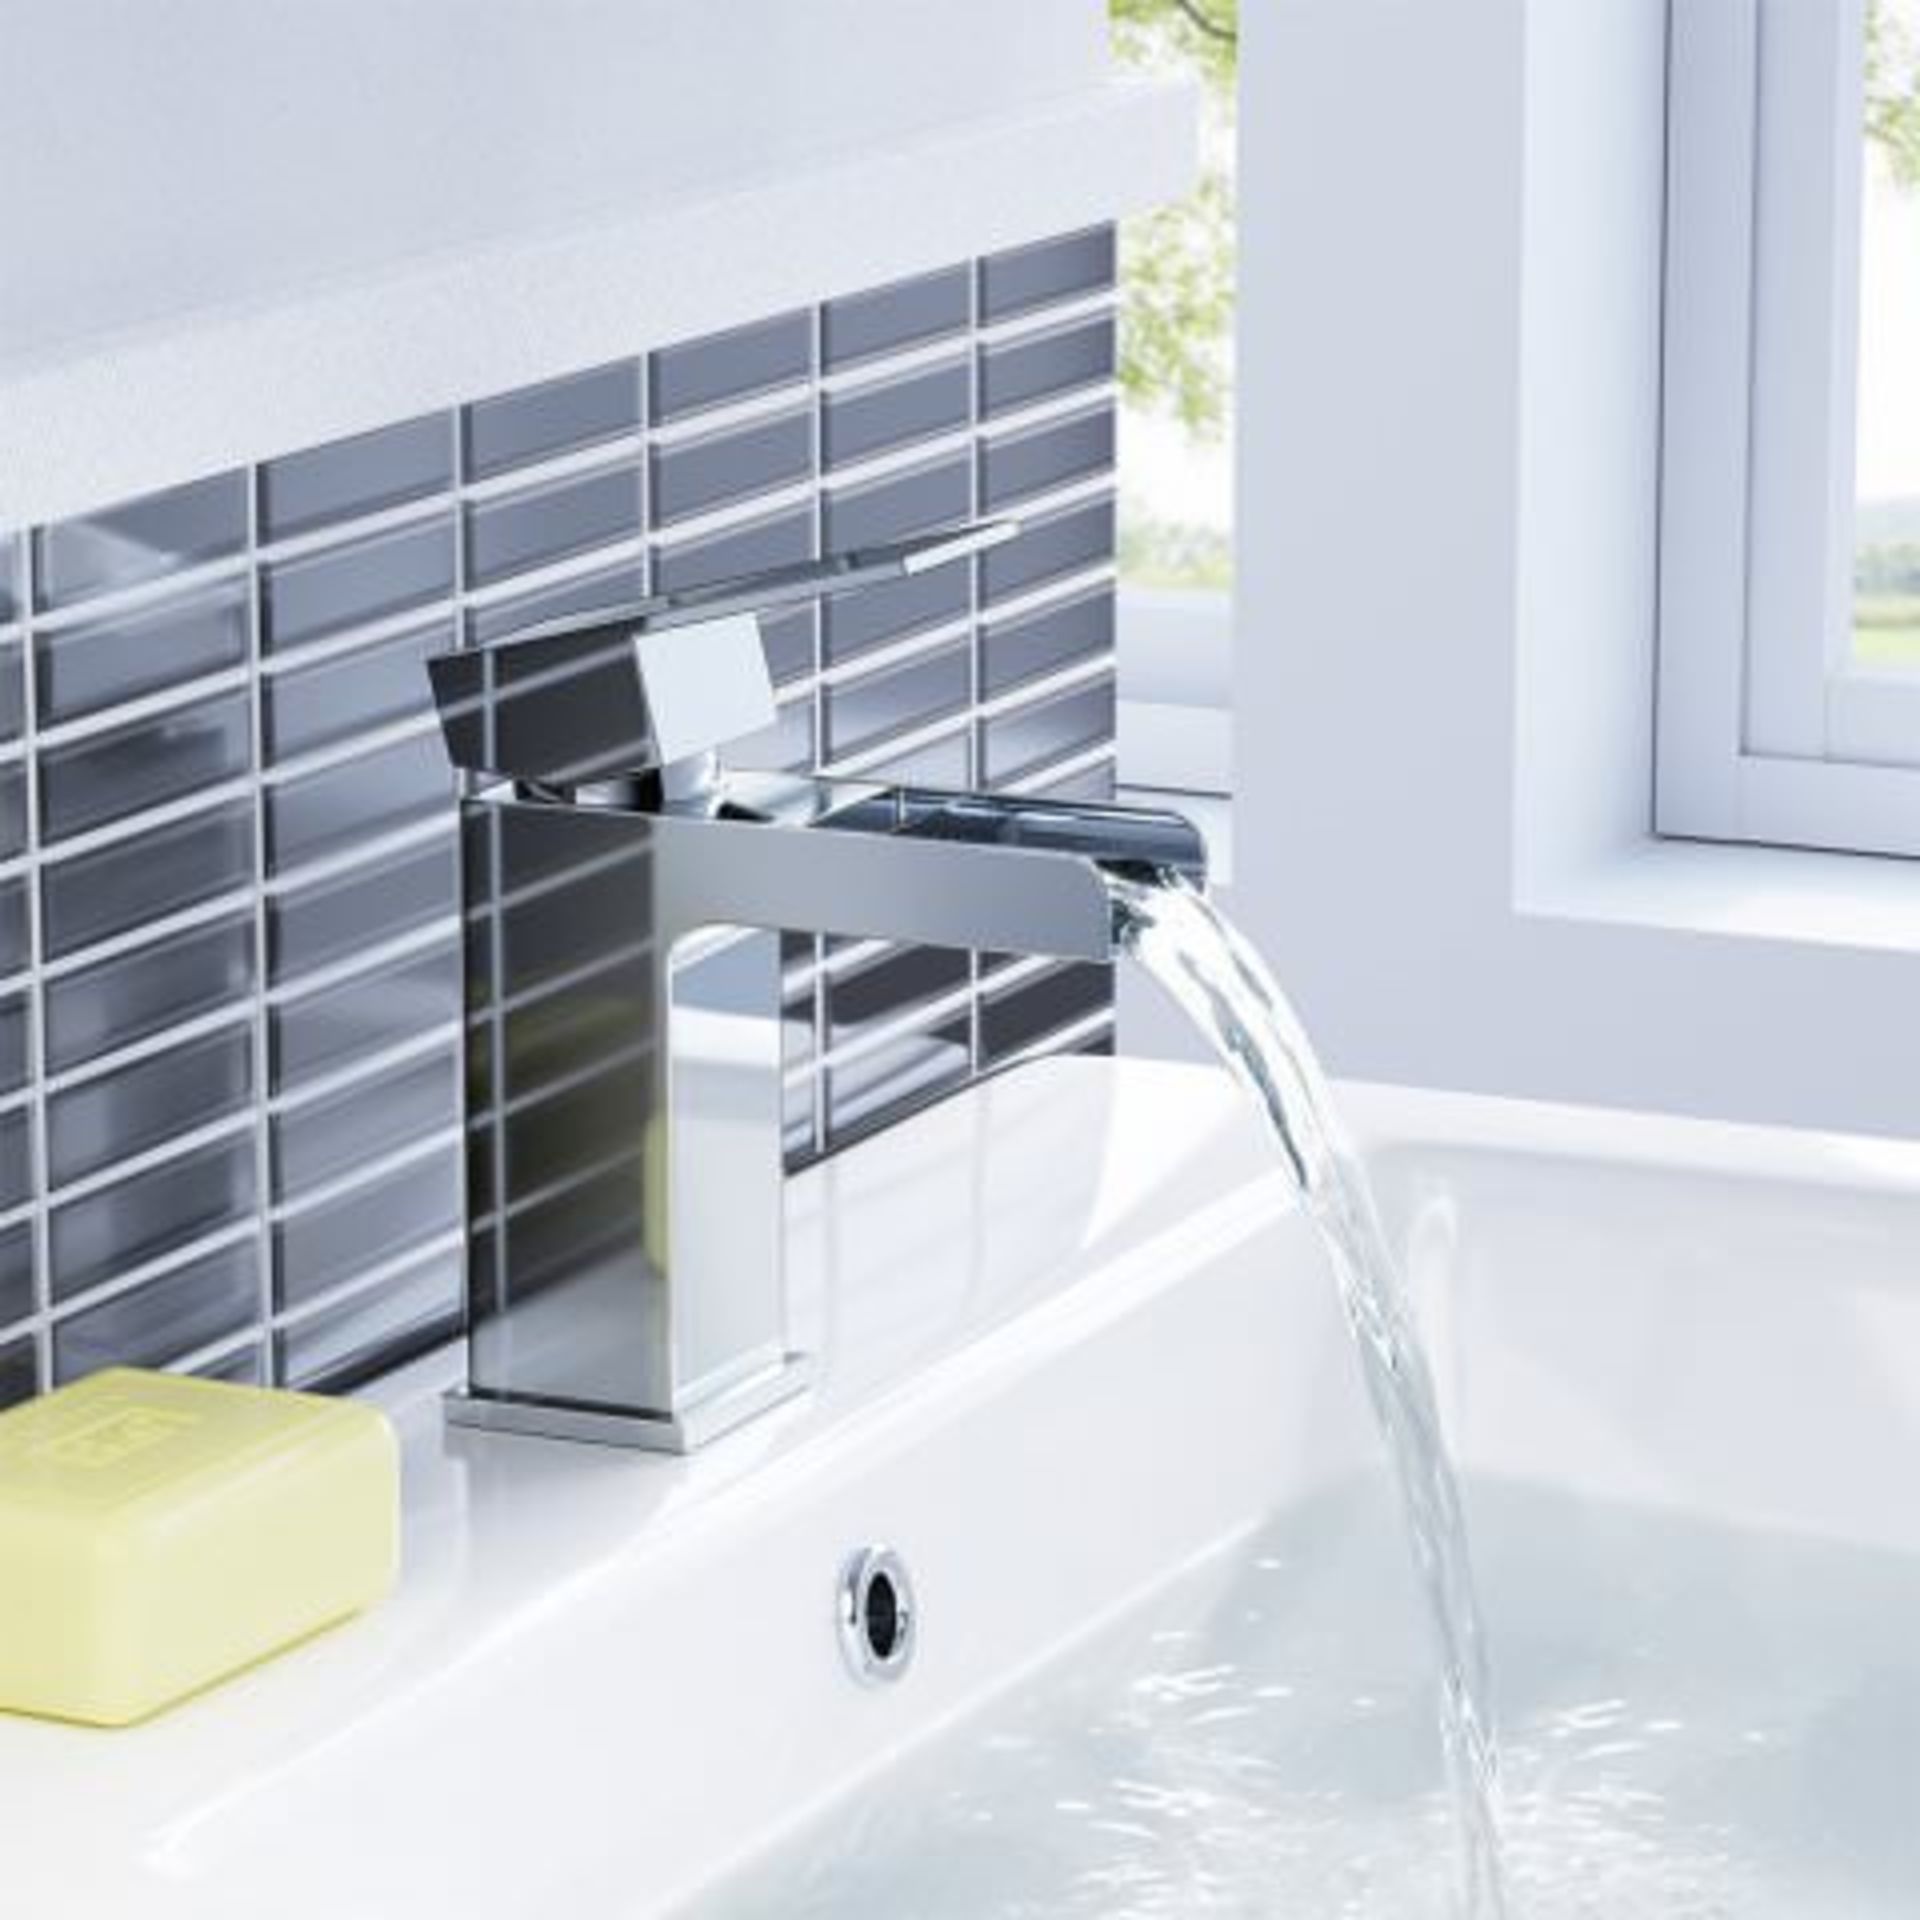 (A32) Niagra II Basin Mixer Tap Waterfall Feature Our range of waterfall taps add a contemporary - Bild 3 aus 3